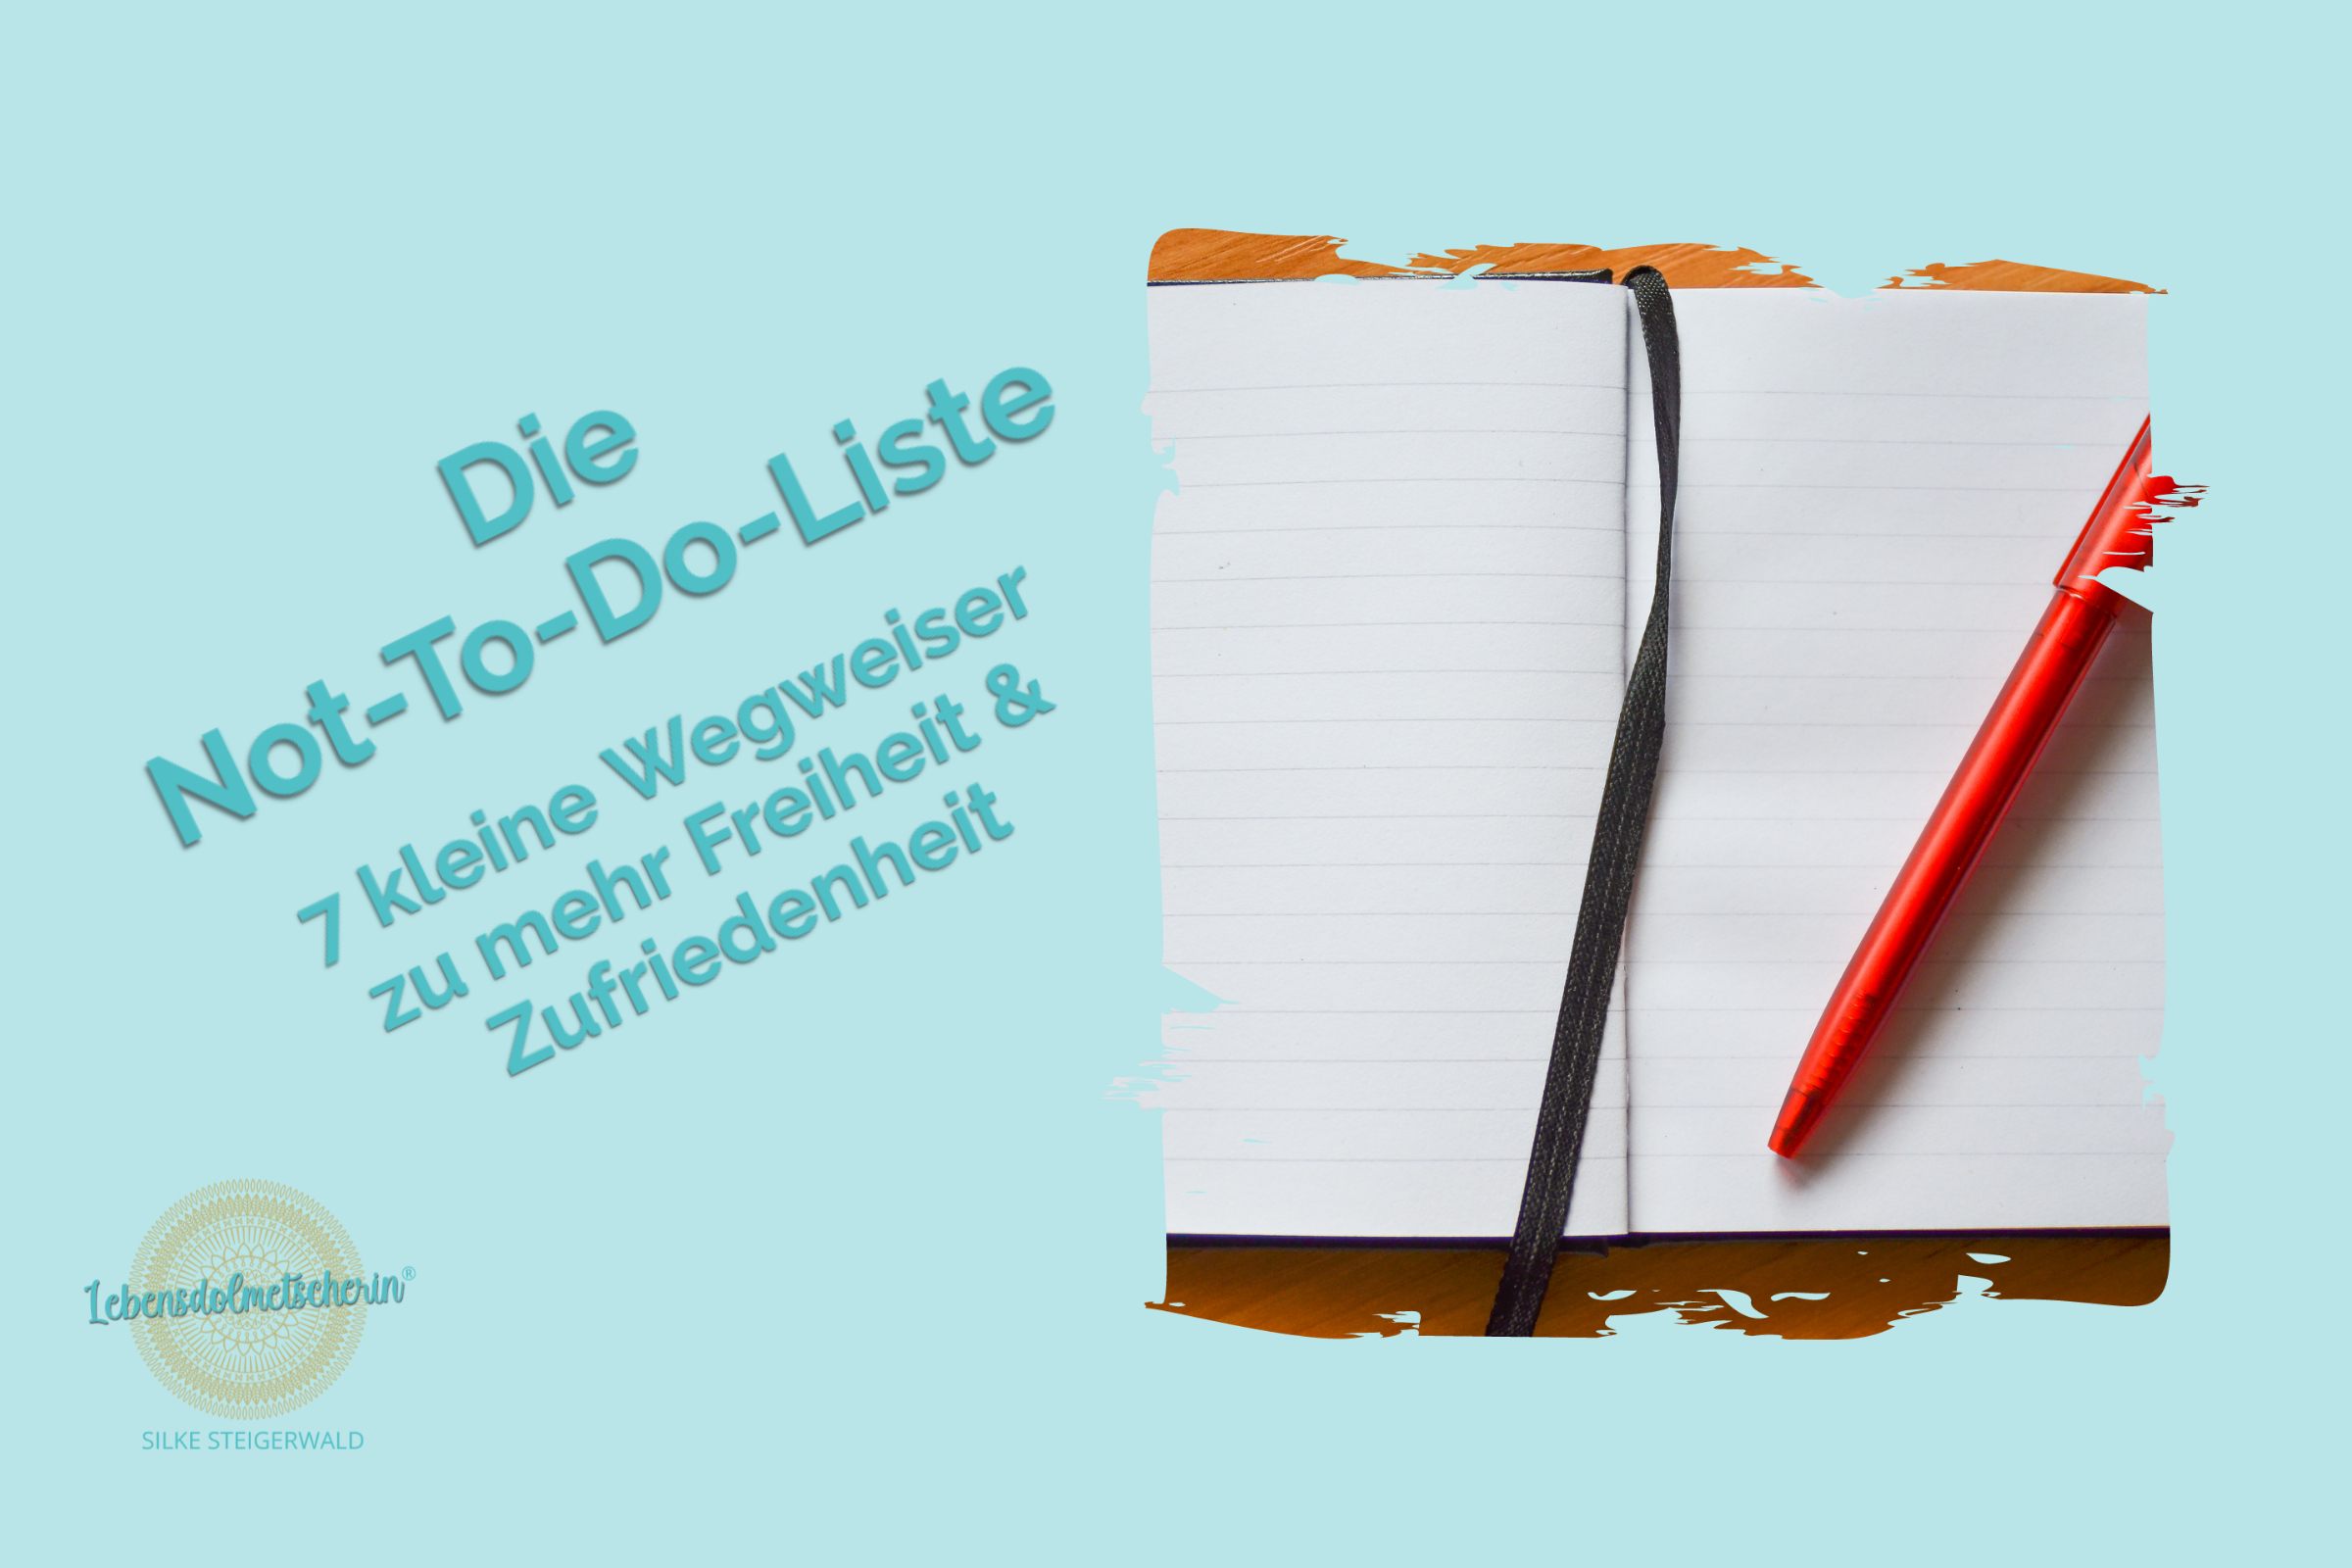 Die Not-To-Do-Liste